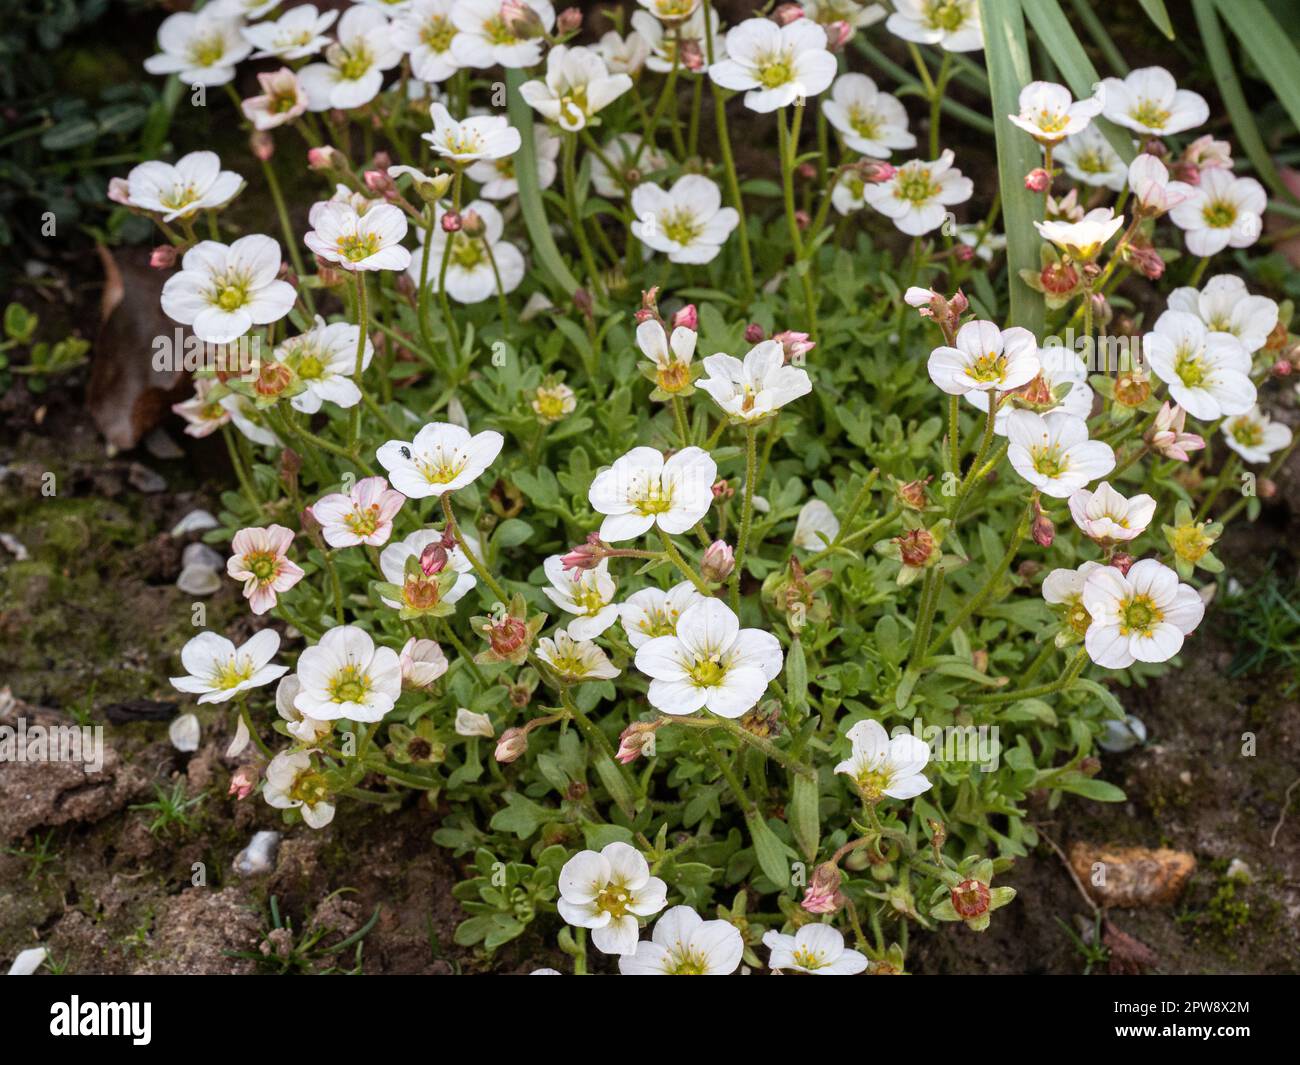 The white flowers and light green mossy foliage of Saxifraga arendsii 'Alpino Early White' Stock Photo